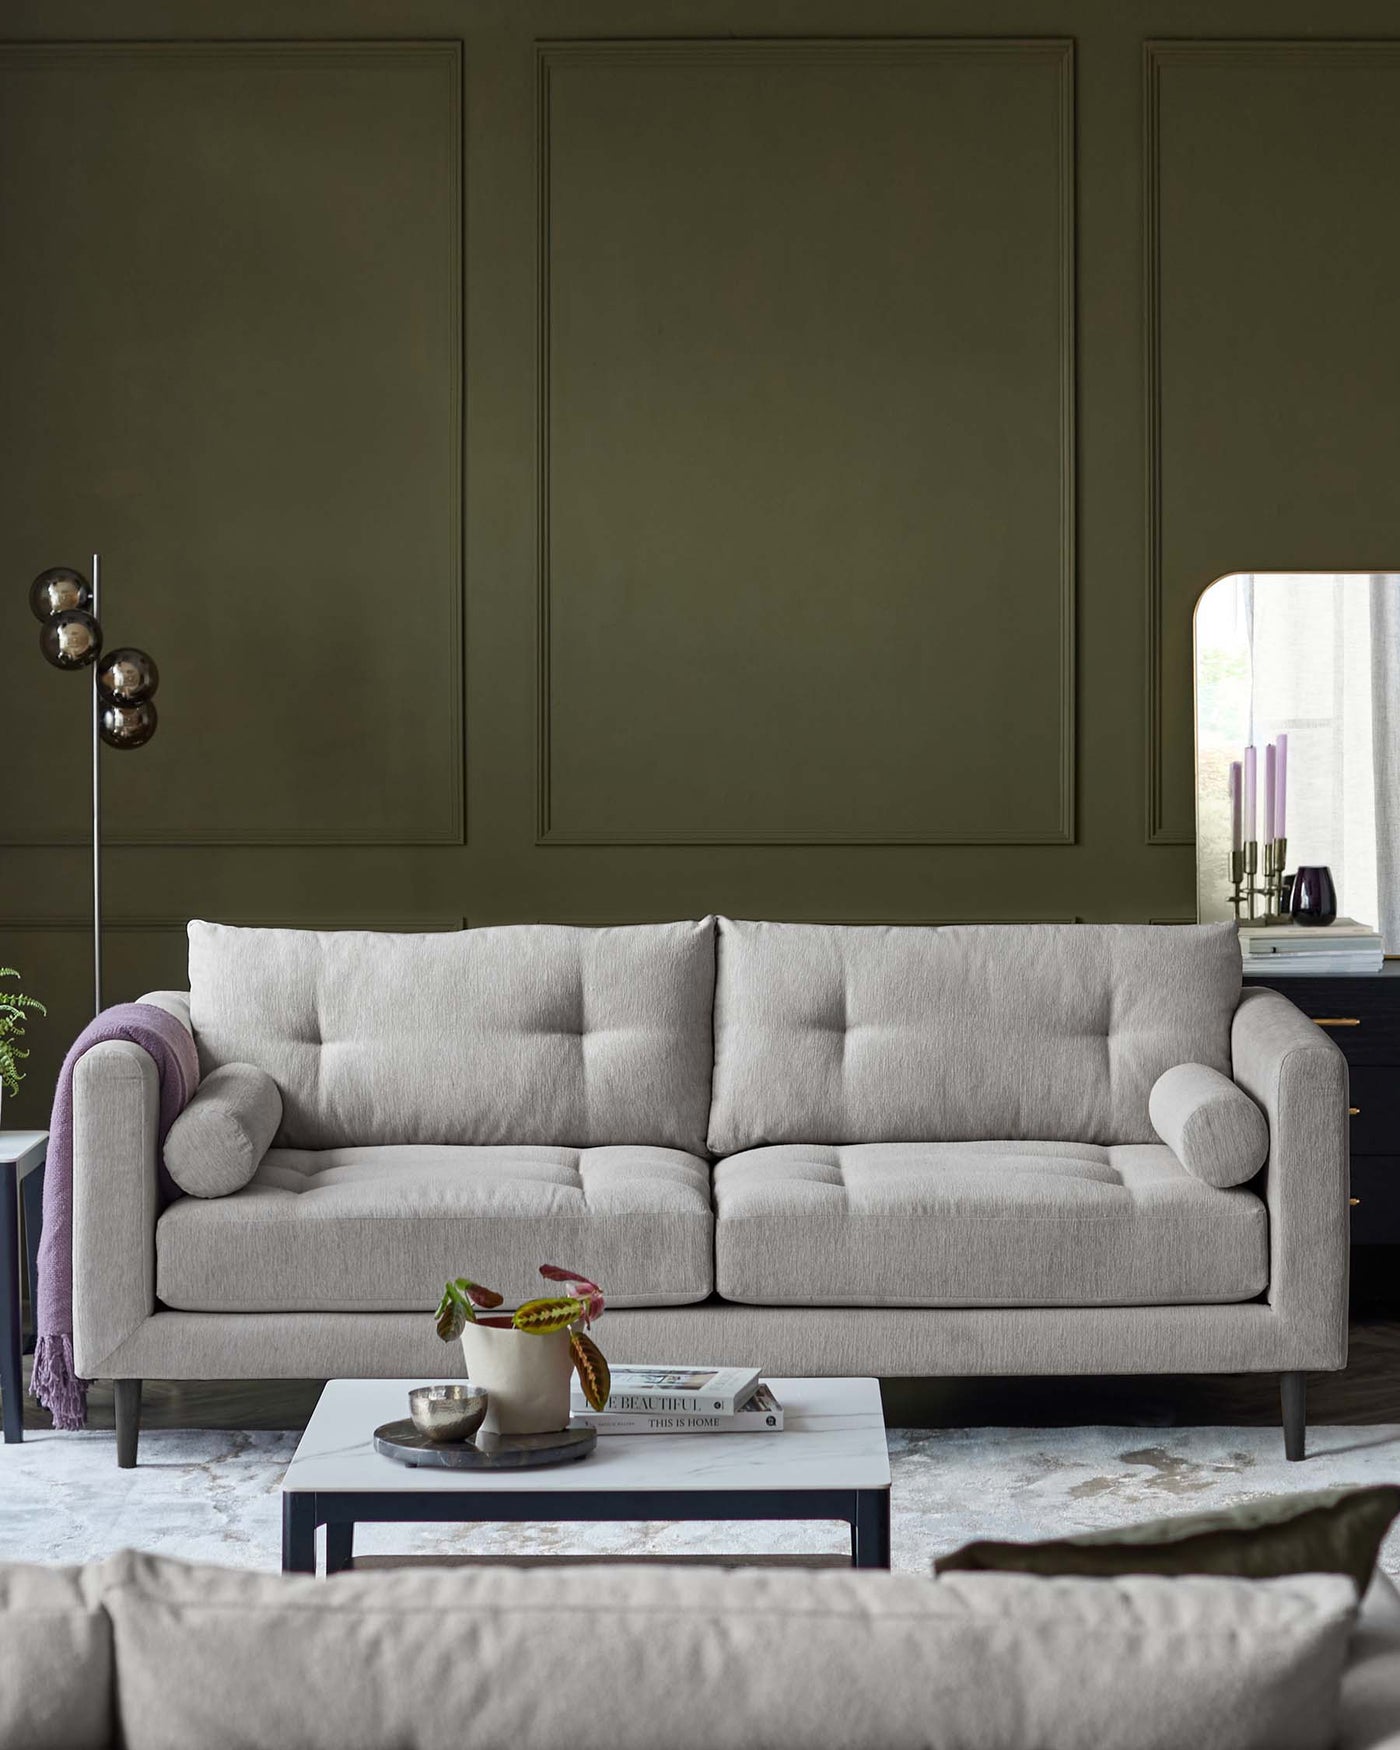 A contemporary three-seater sofa upholstered in a light grey fabric with plush seating cushions, rounded armrests, and cylindrical lumbar pillow. In front of the sofa is a rectangular, dark grey coffee table upon which rests a decorative bowl with plant, a book, and an ornamental object.